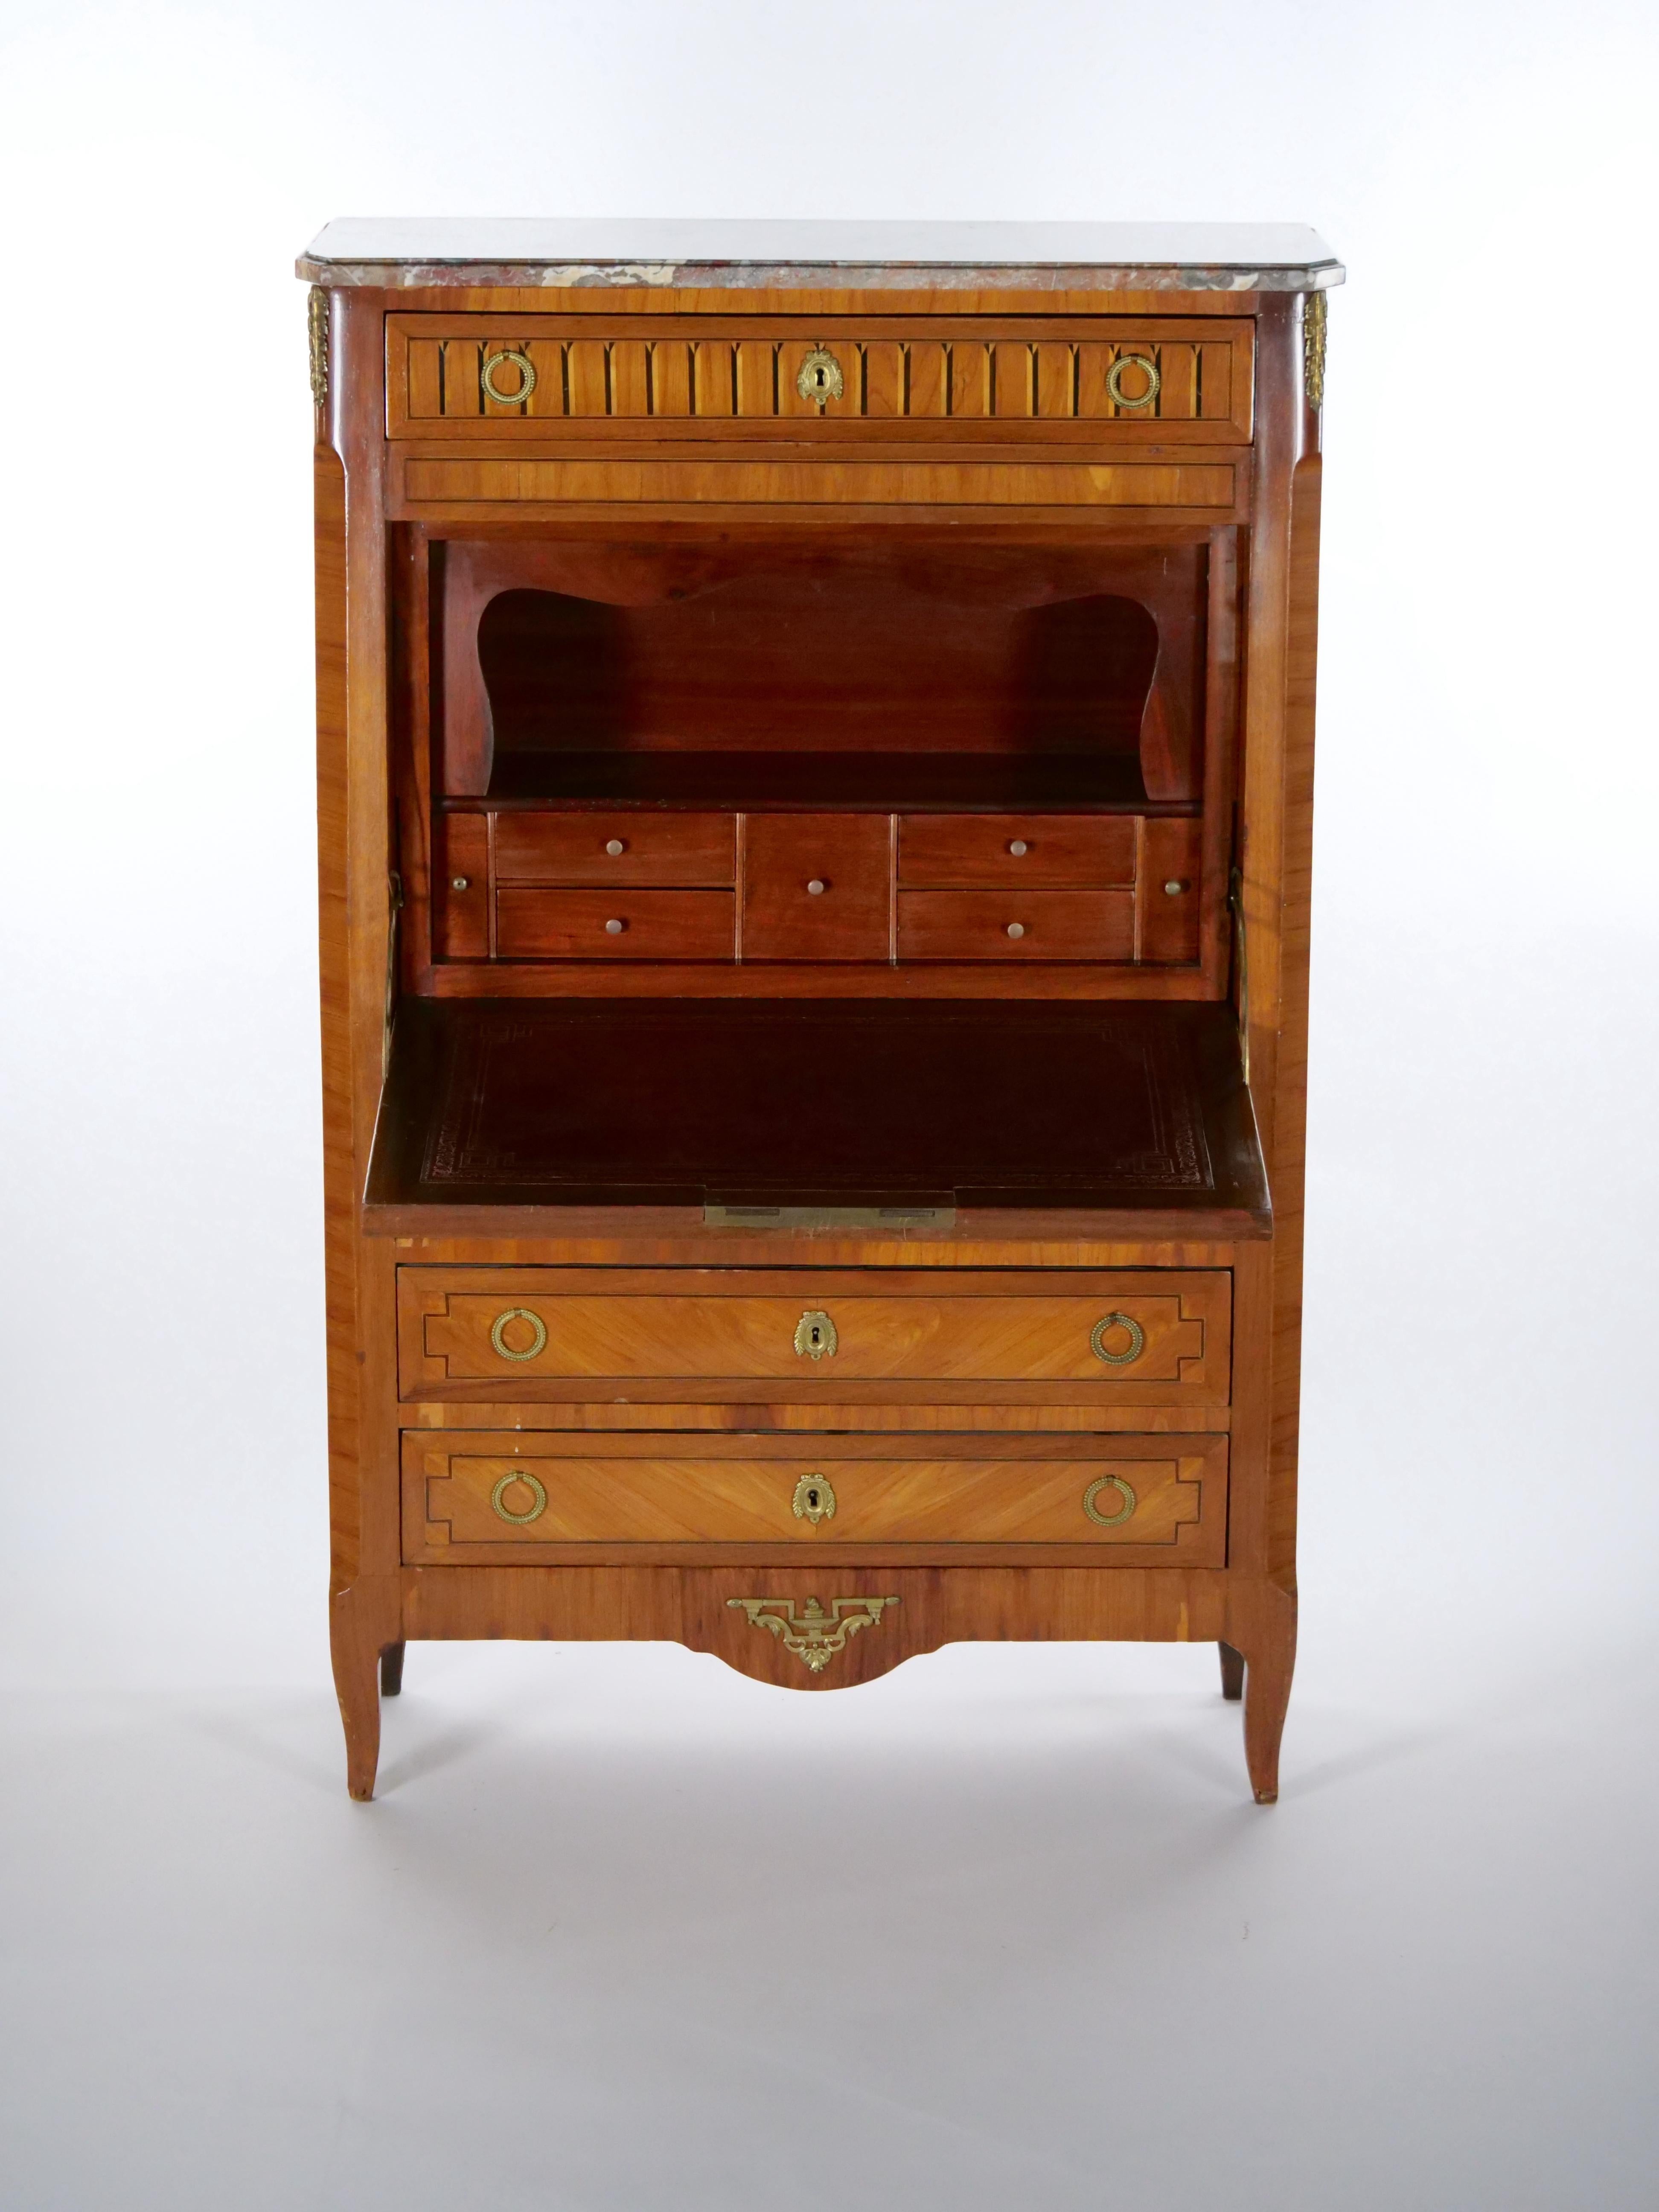 Beautiful craftsmanship Louis Philippe style secretary chest cabinet desk in a satin / burl wood with exterior front inlay musical instruments and flowers marquetry scene details. The secretary features lot of storage drawers above fall-front,